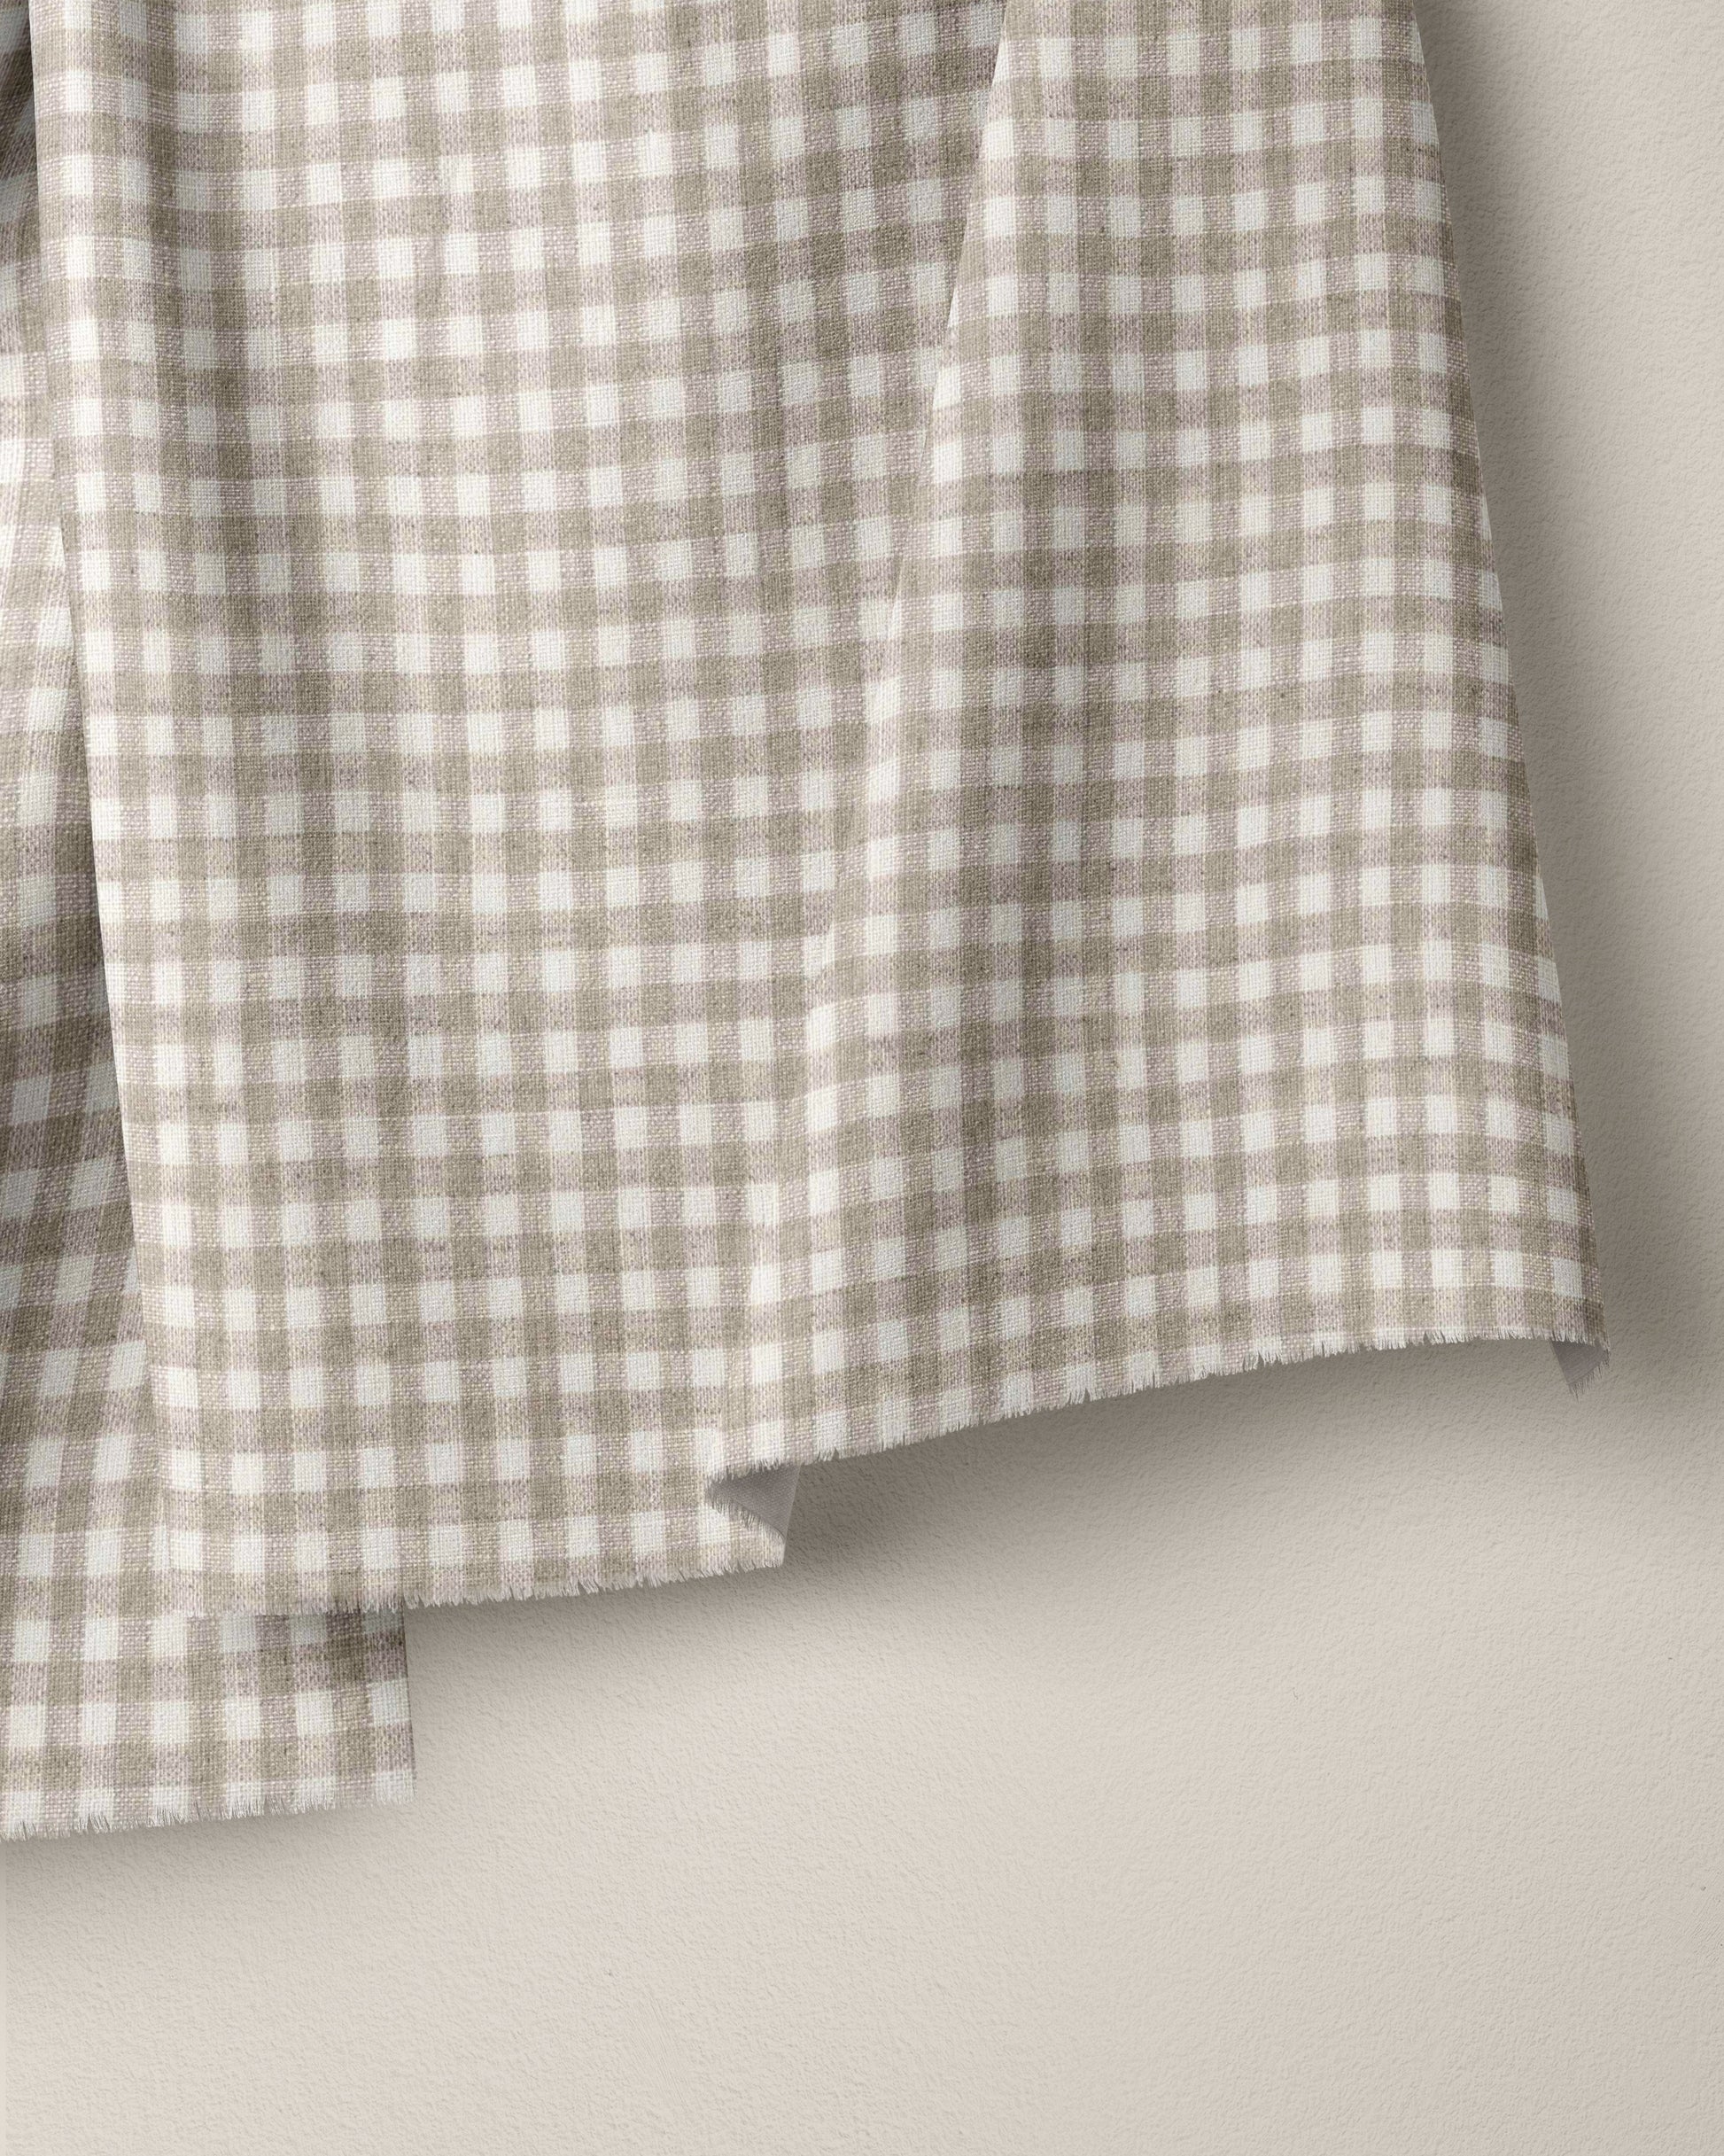 Linen gingham fabric for shirts and dresses, with gingham checks